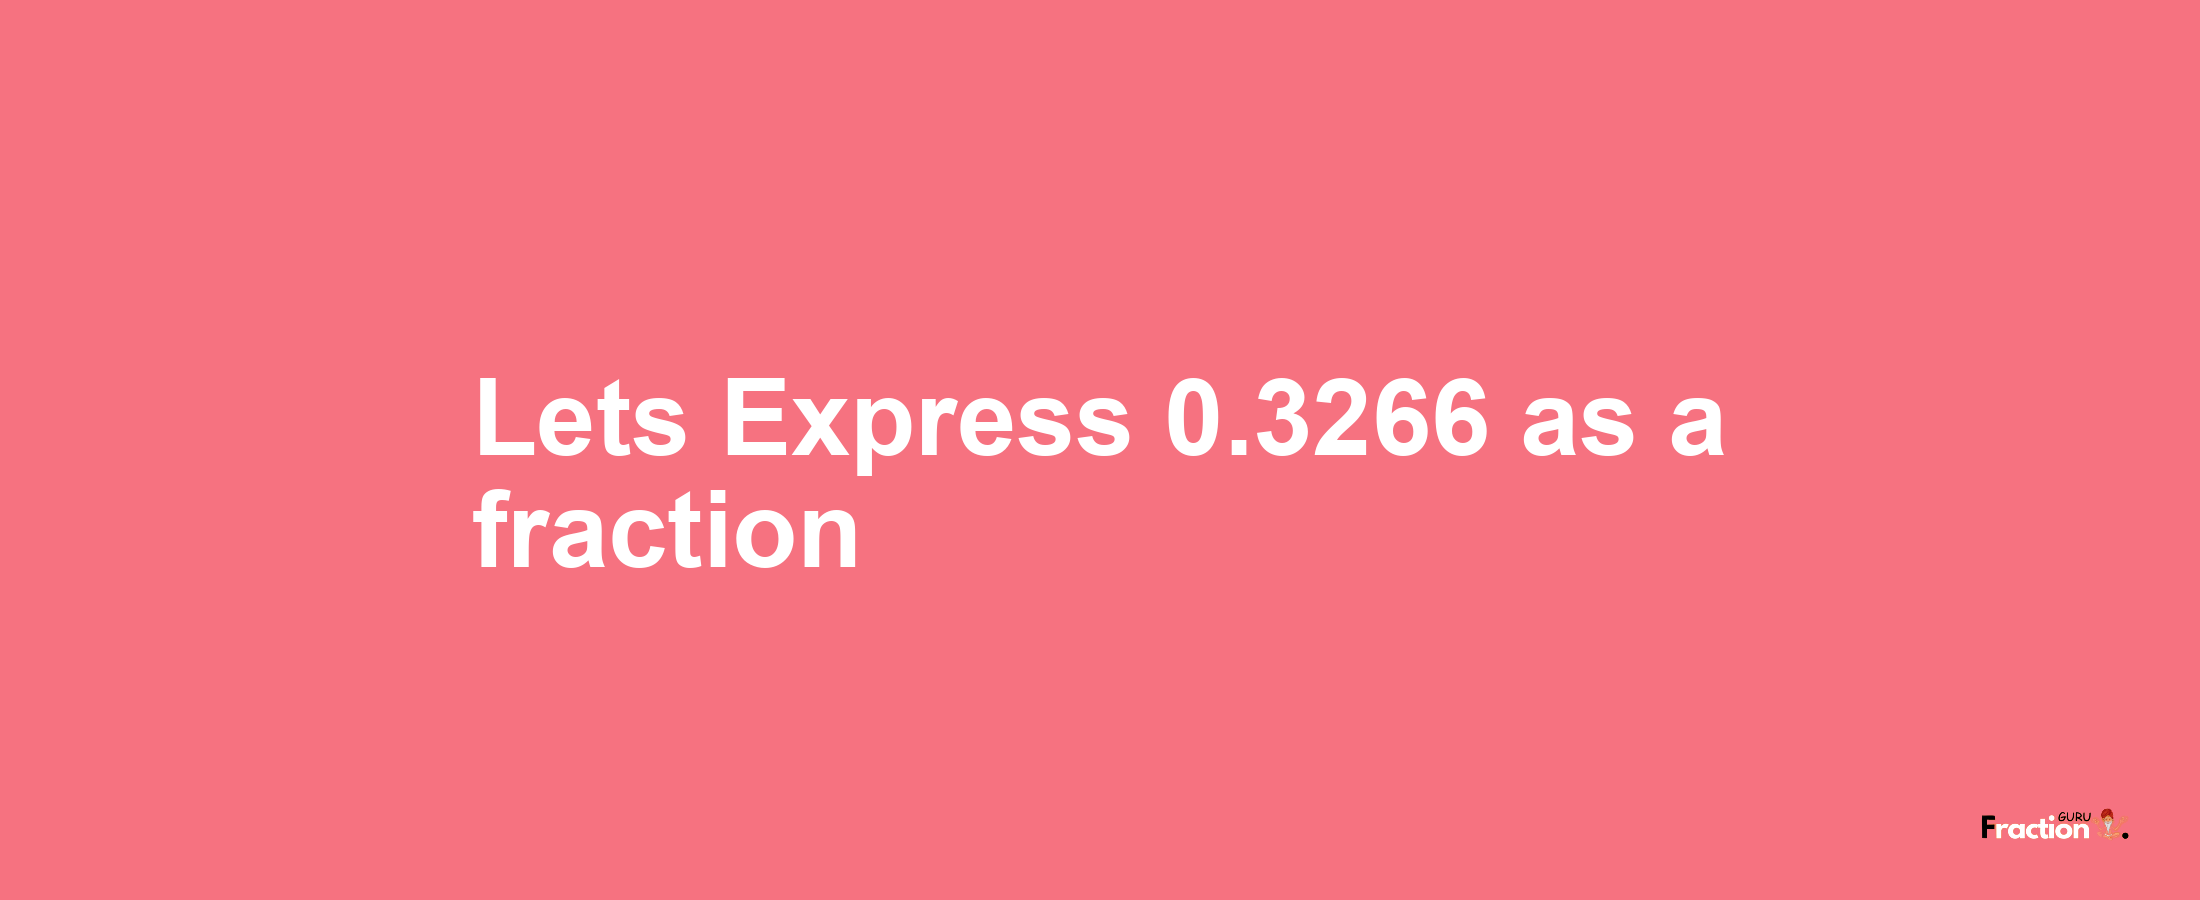 Lets Express 0.3266 as afraction